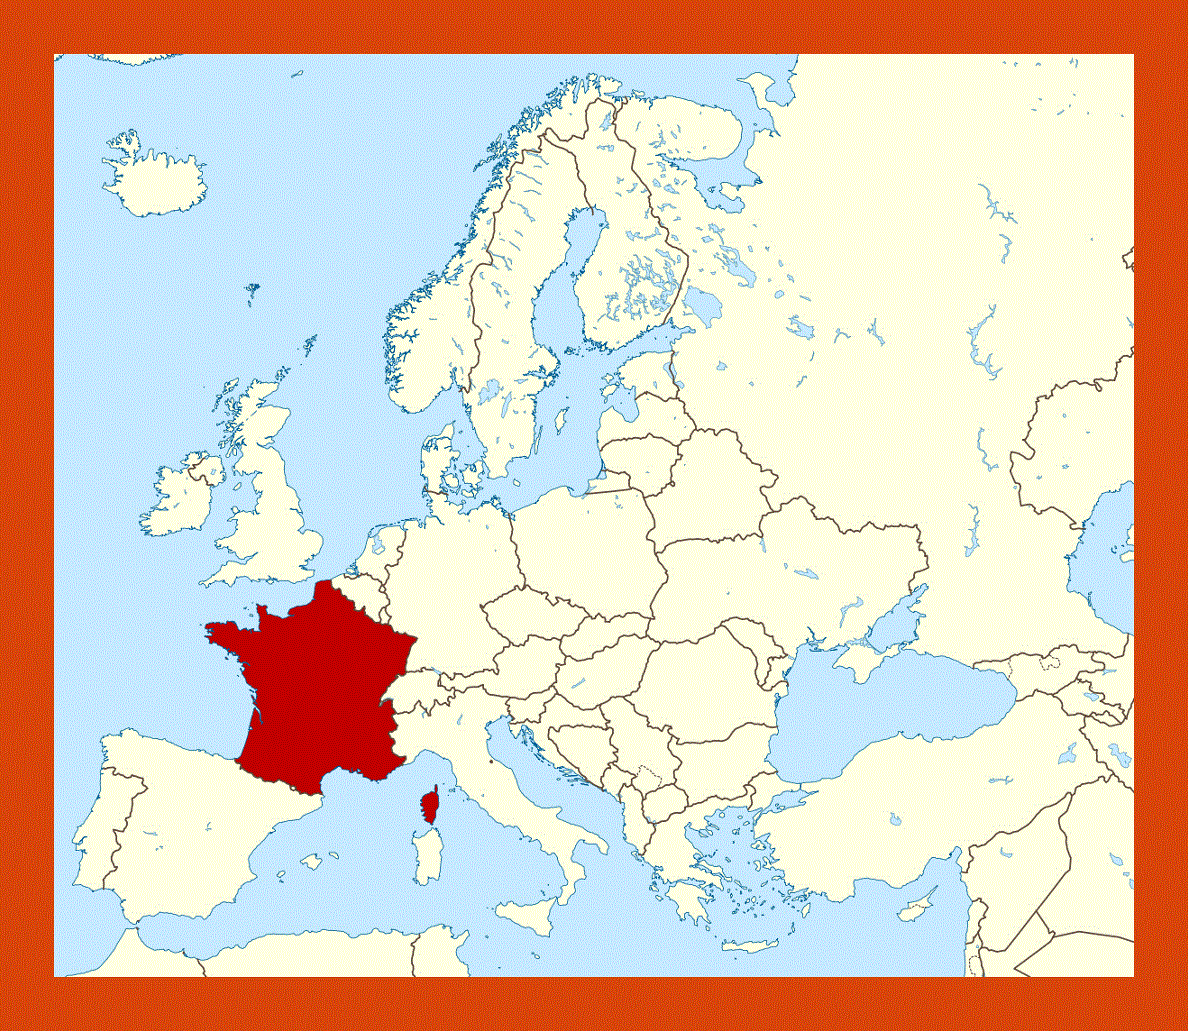 Location map of France in Europe